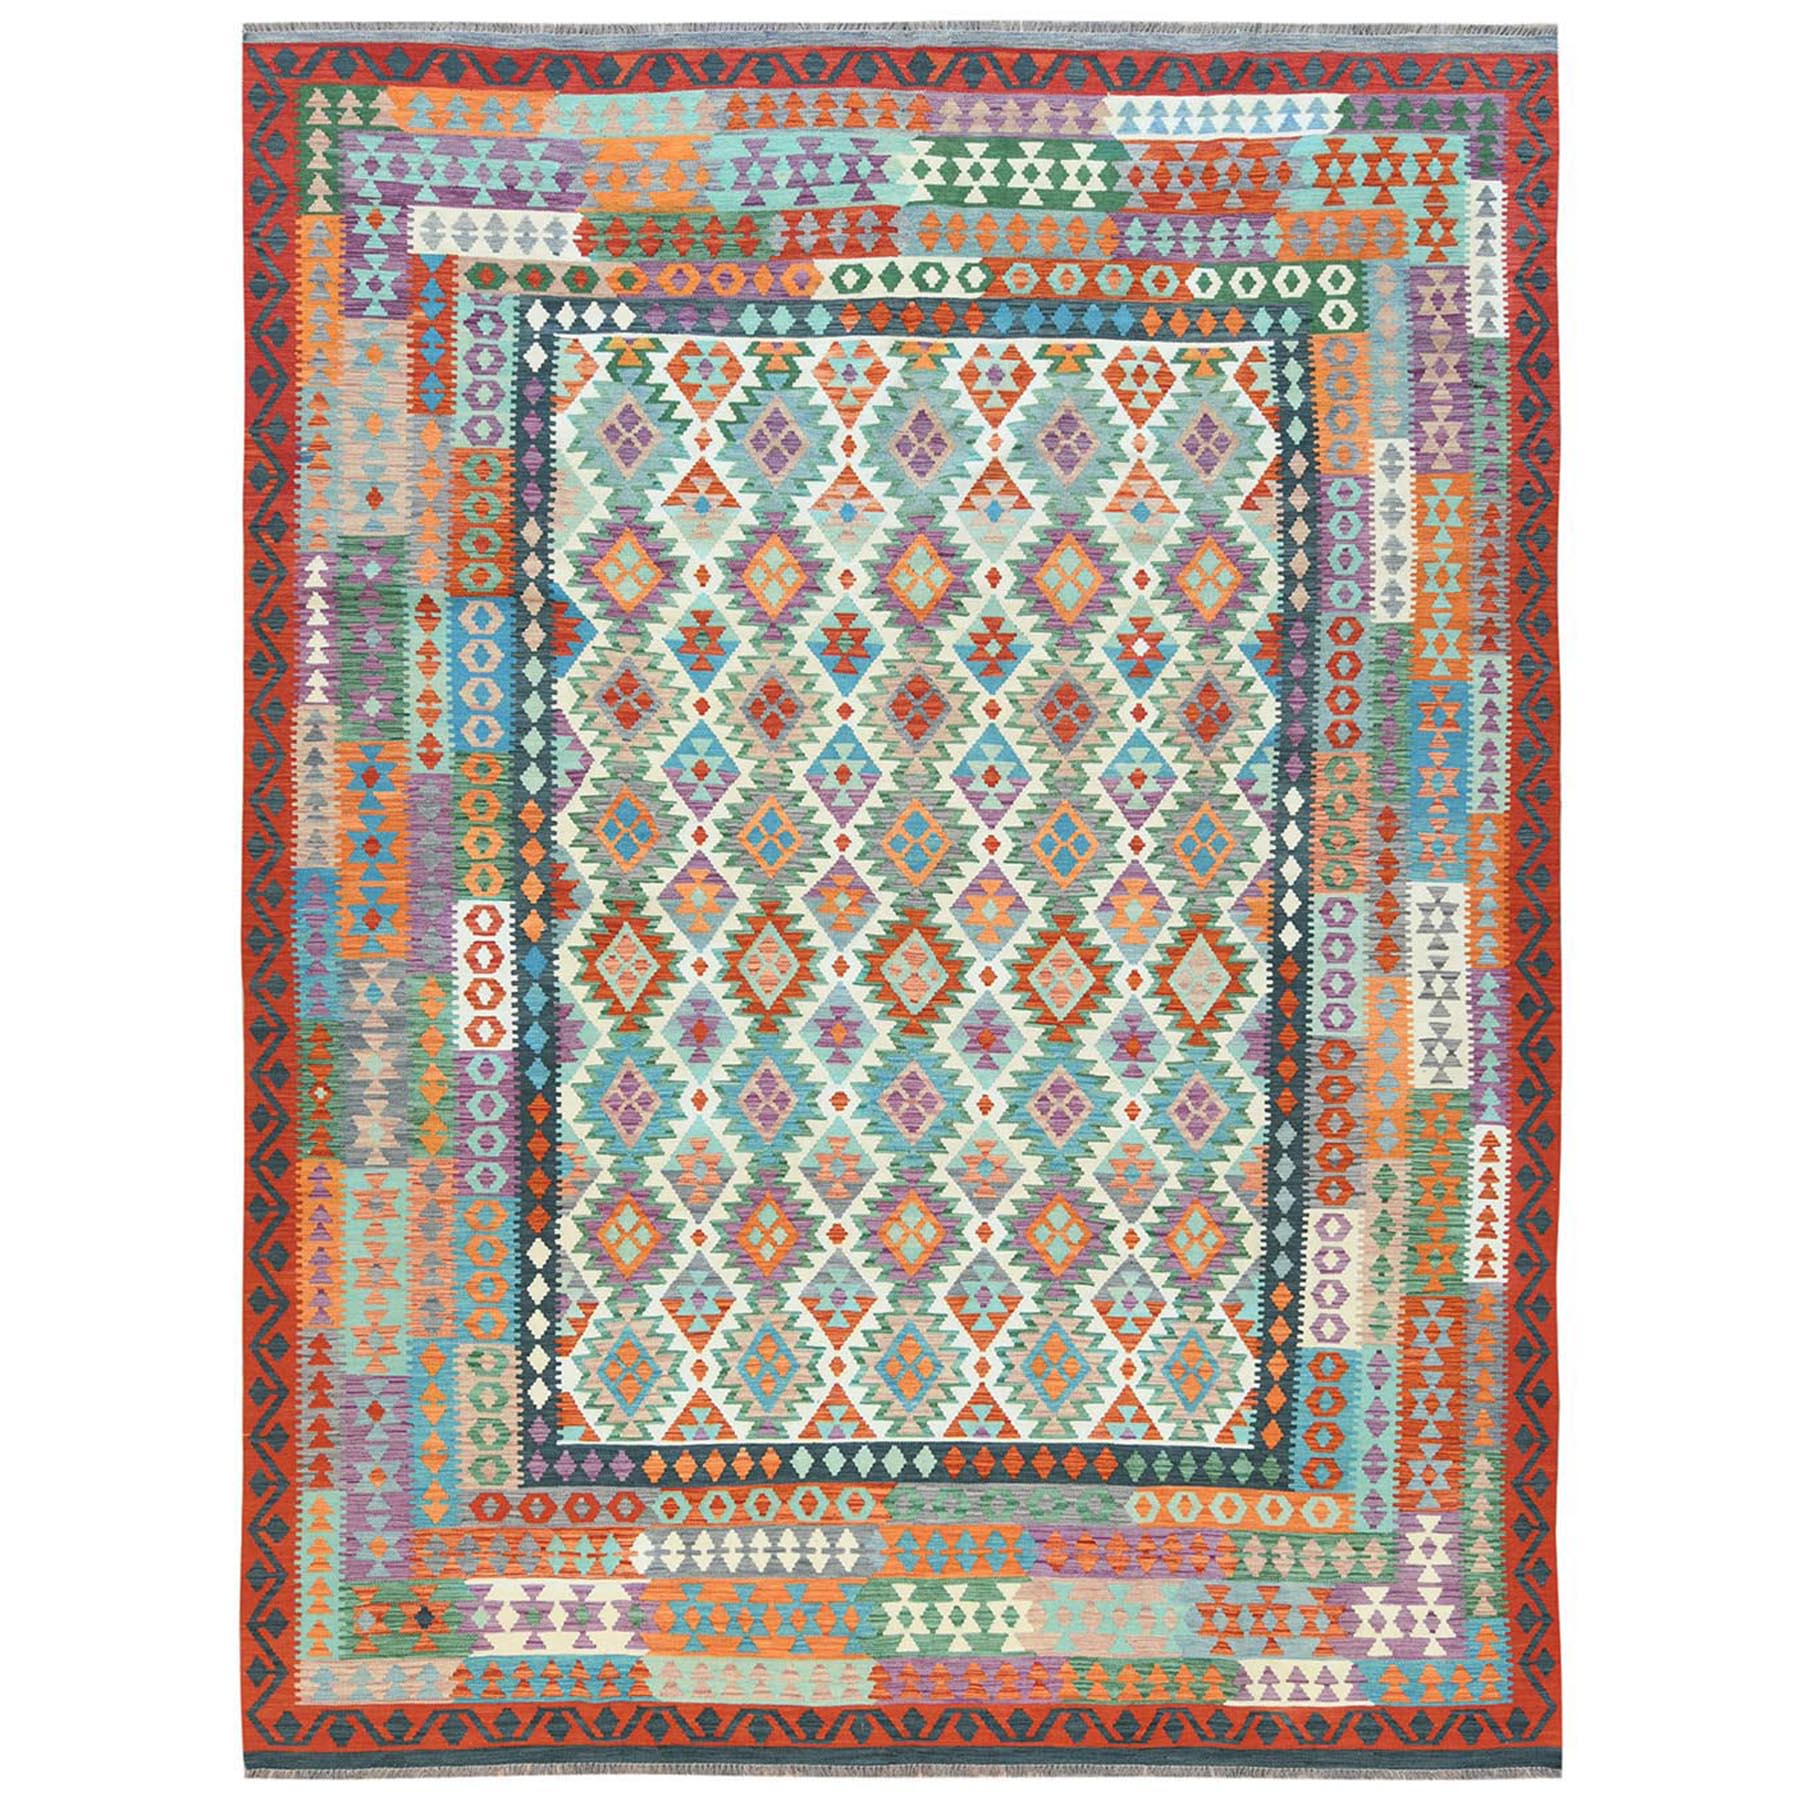 9'10"x13'2" Colorful, Afghan Kilim with Geometric Design Flat Weave, Veggie Dyes Pure Wool Hand Woven, Reversible Oriental Rug 